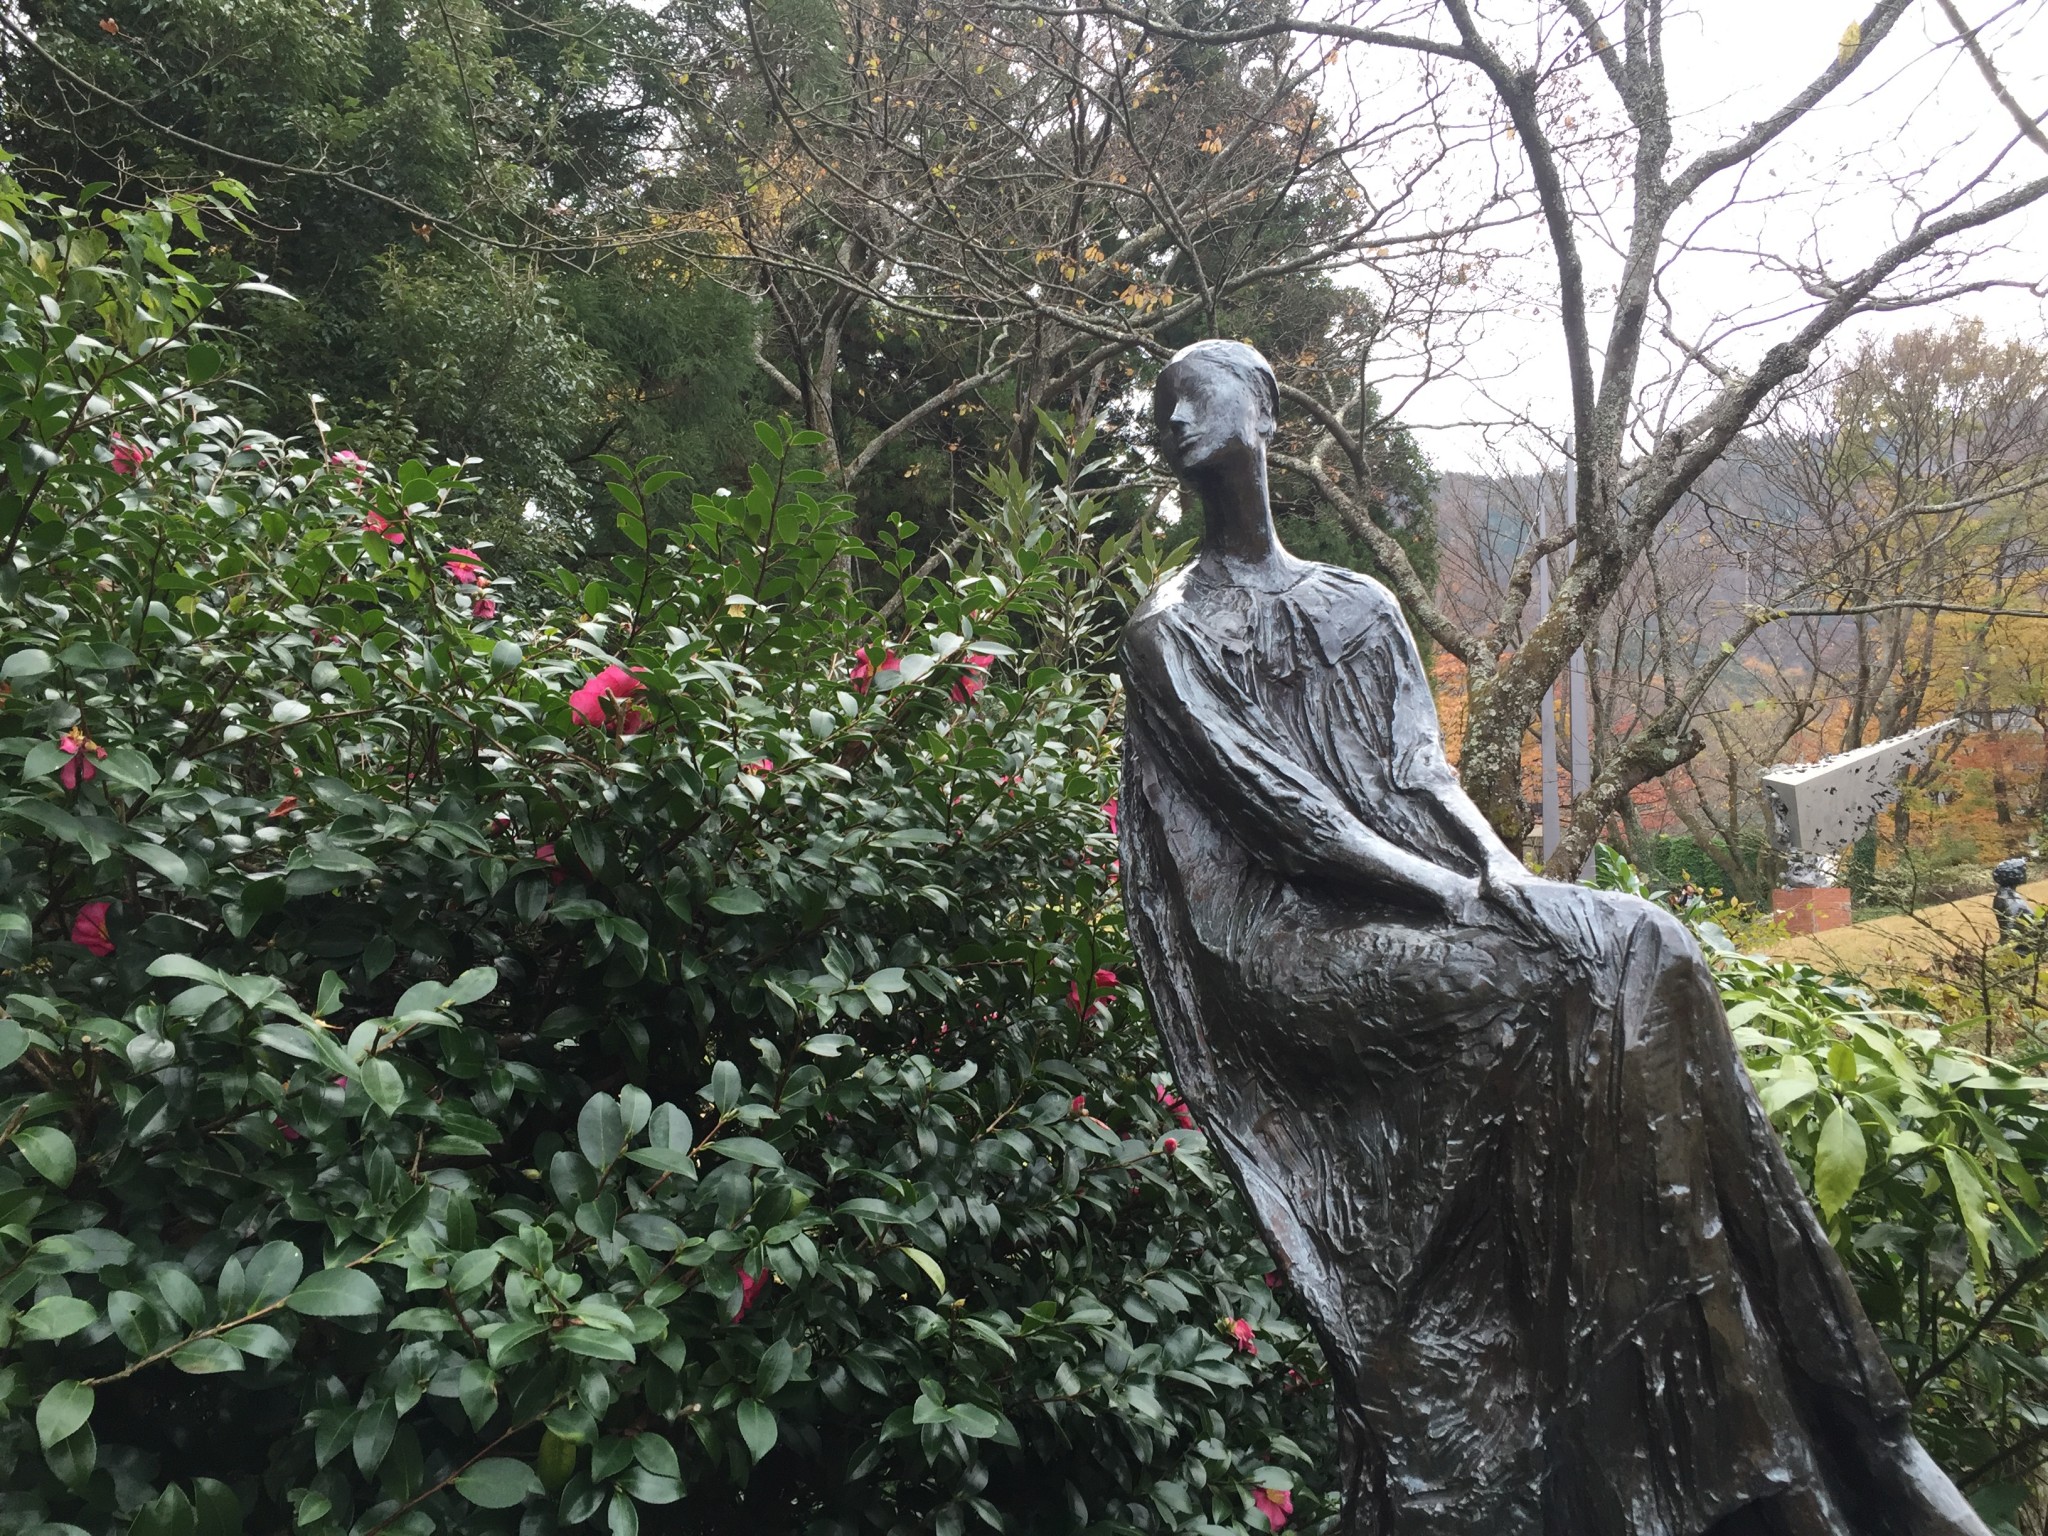 Hakone Open-Air Museum – Art and nature in harmony